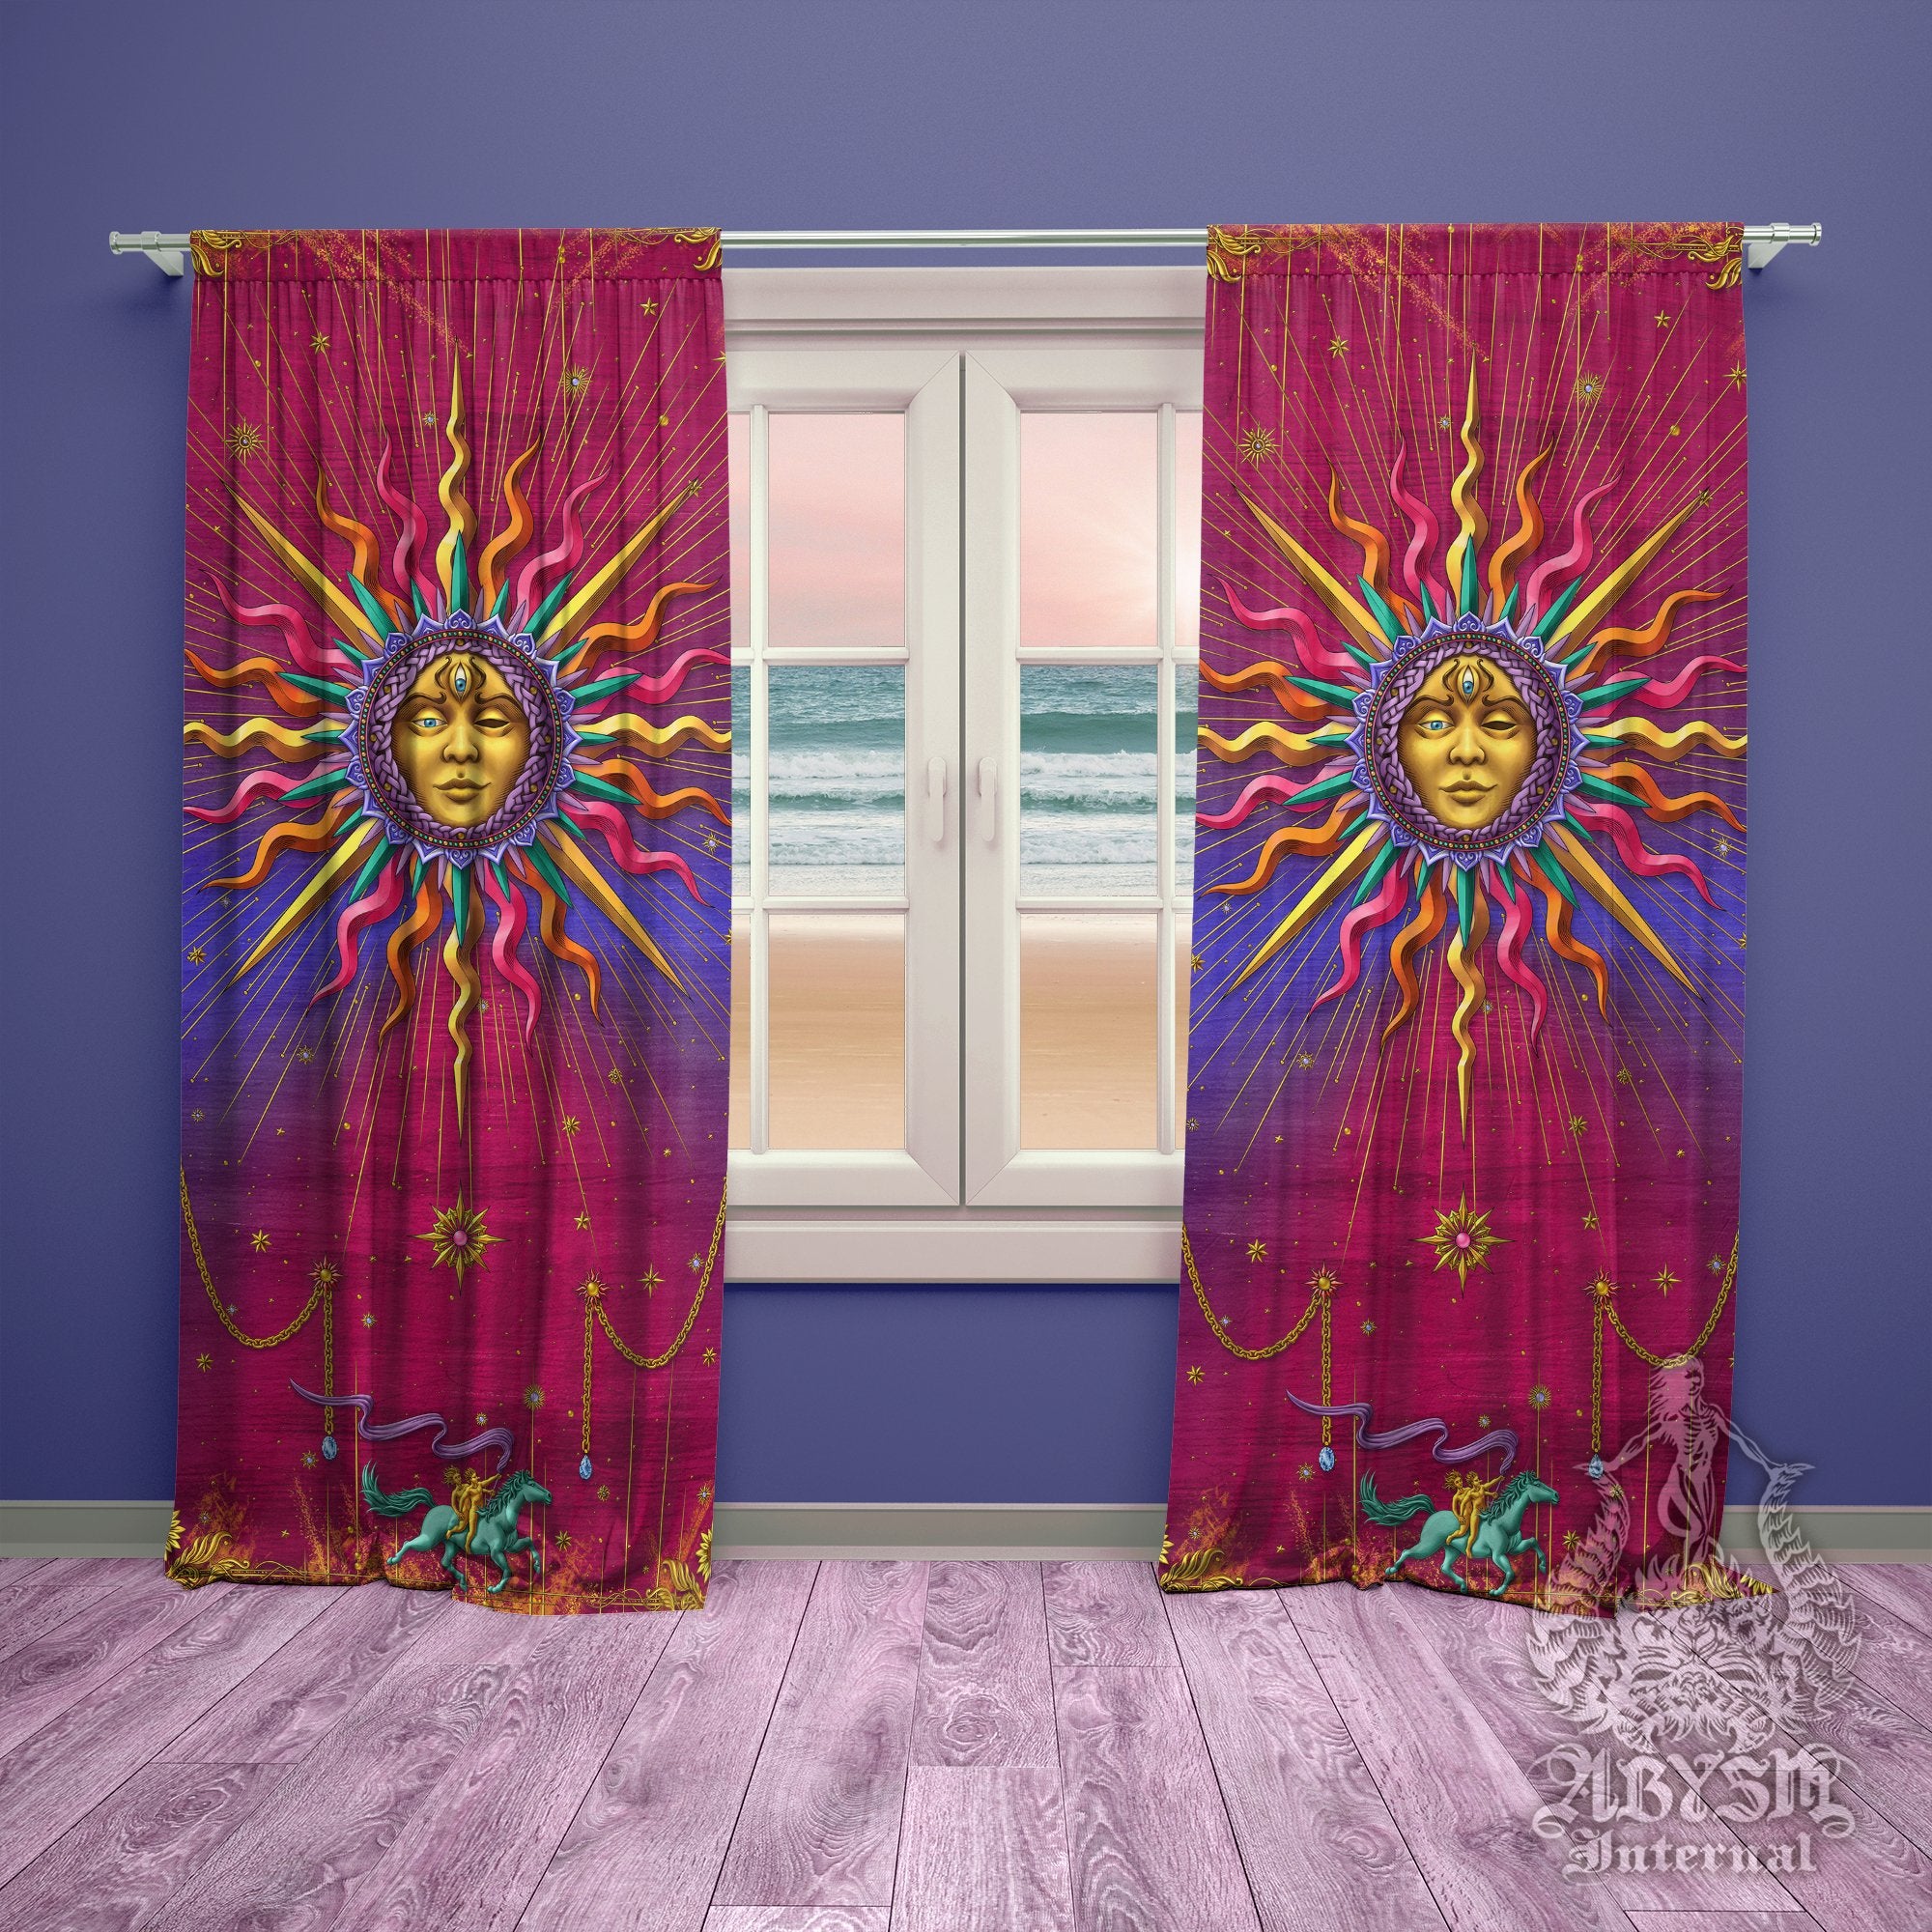 Boho Sun Curtains, 50x84' Printed Window Panels, Psychedelic Indie Home Decor, Tarot Arcana, Trippy Esoteric Art Print - Psy - Abysm Internal